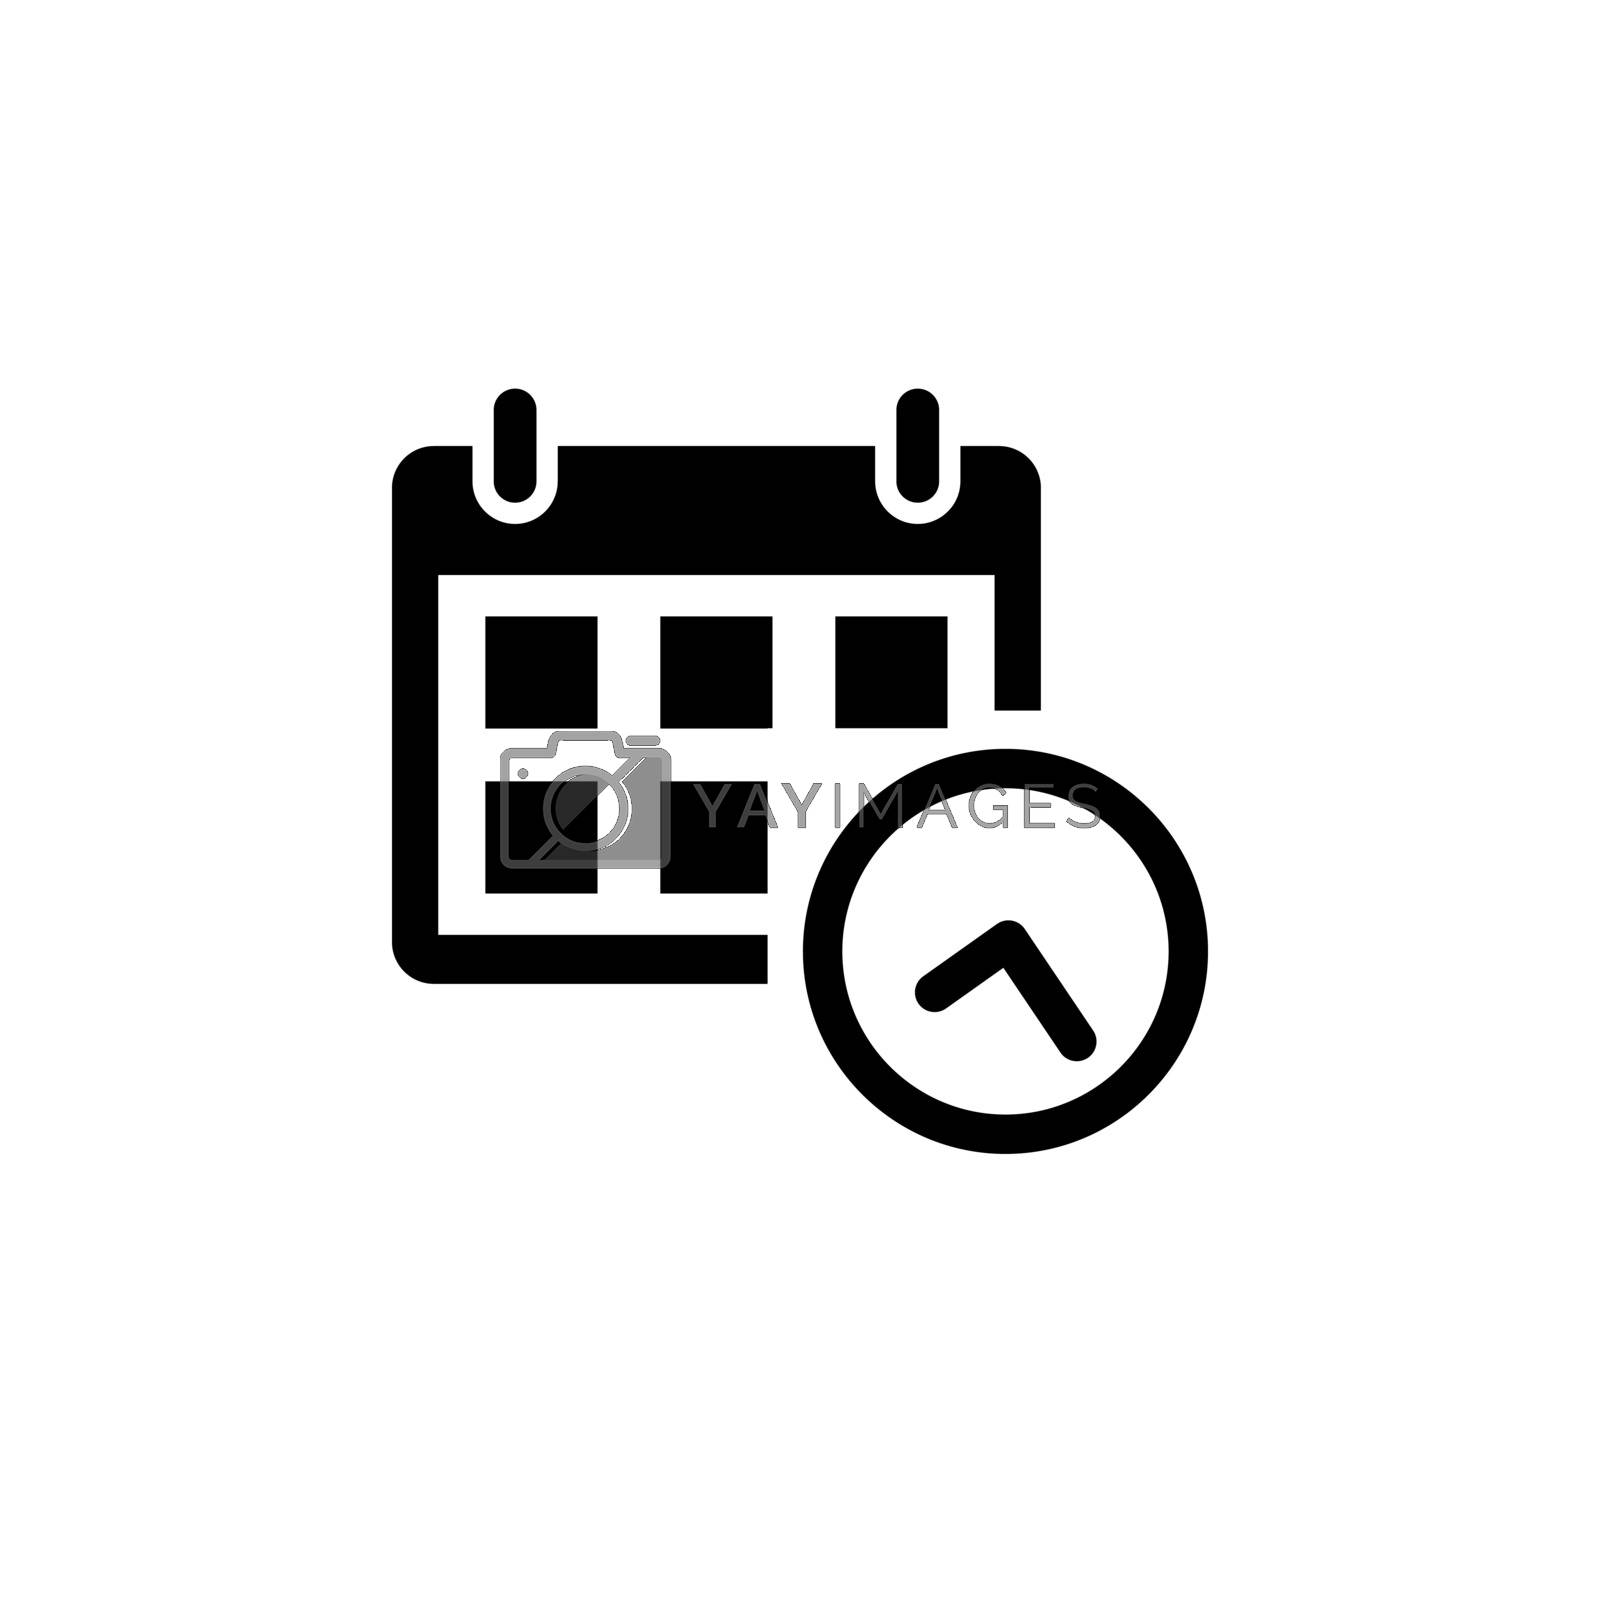 Royalty free image of Calendar Icon in flat style by veronawinner